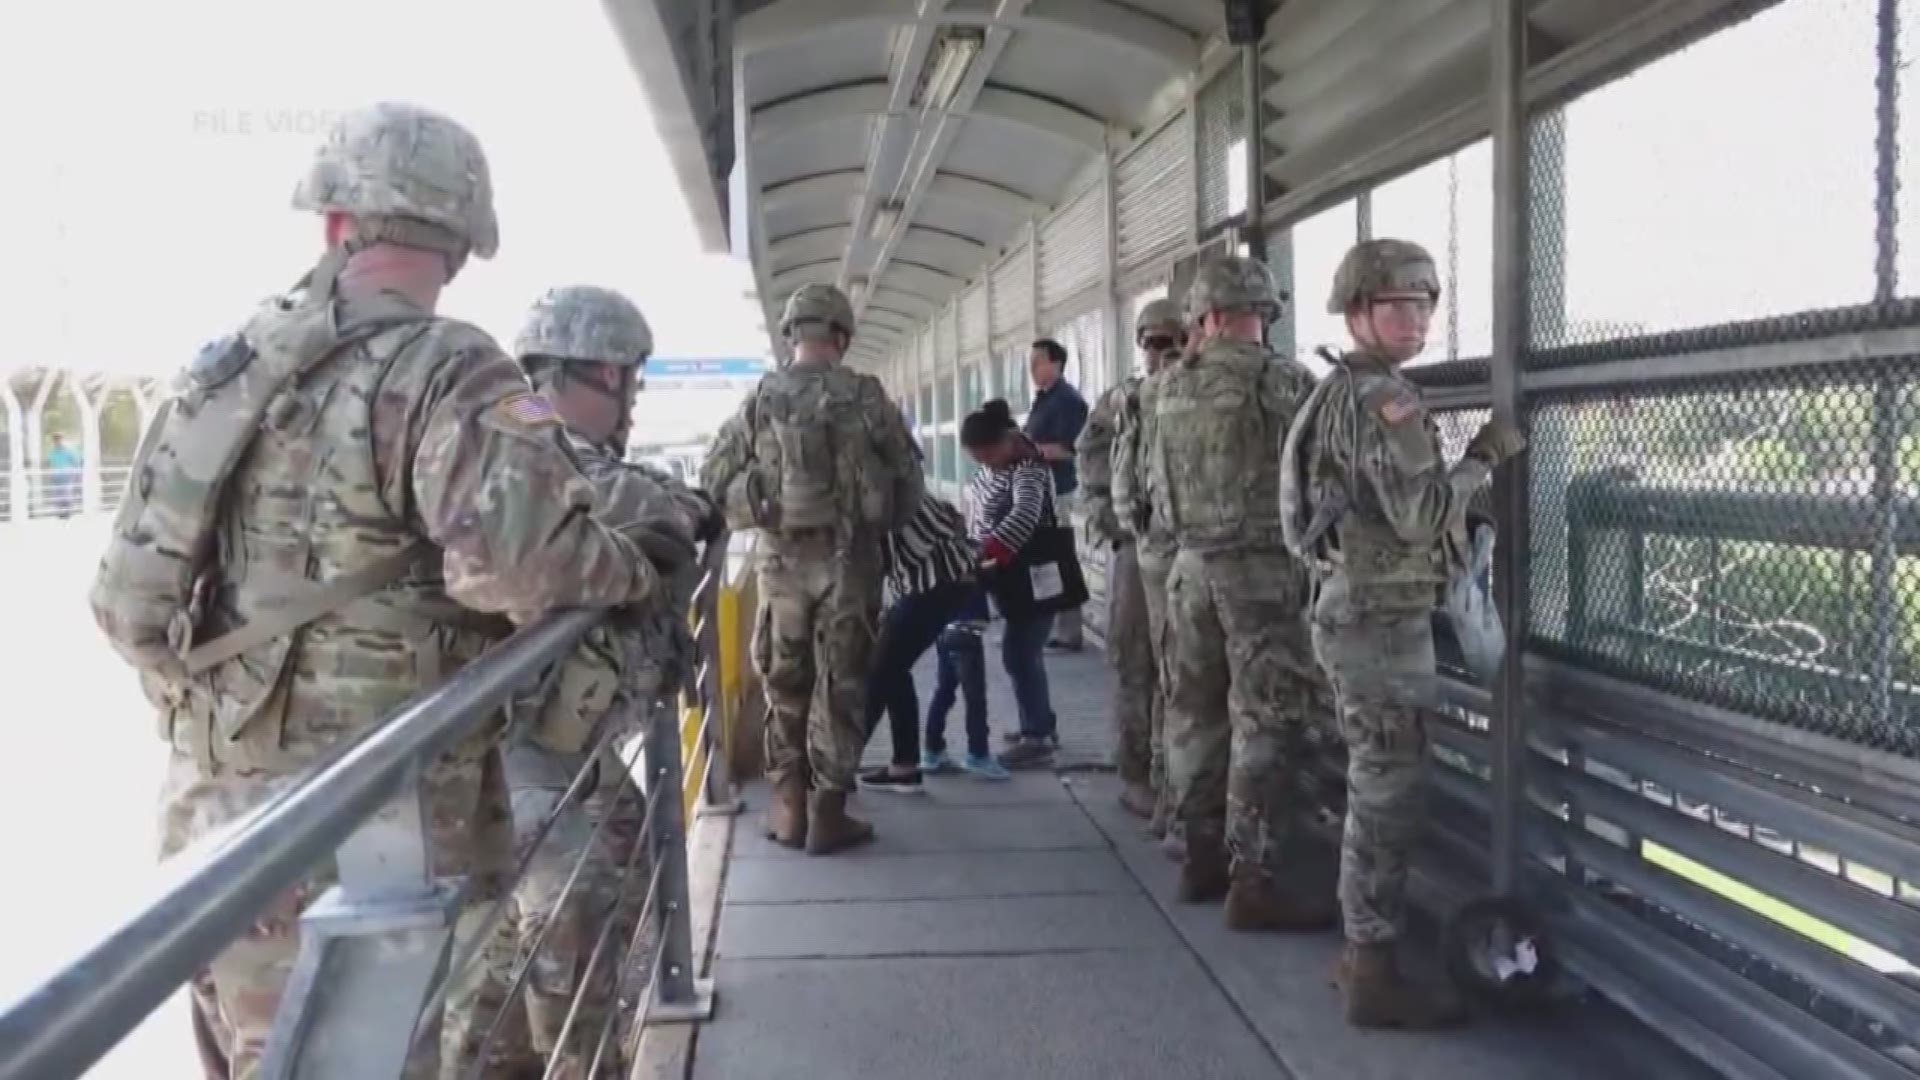 Military troops sent to Eagle Pass to reinforce border security after